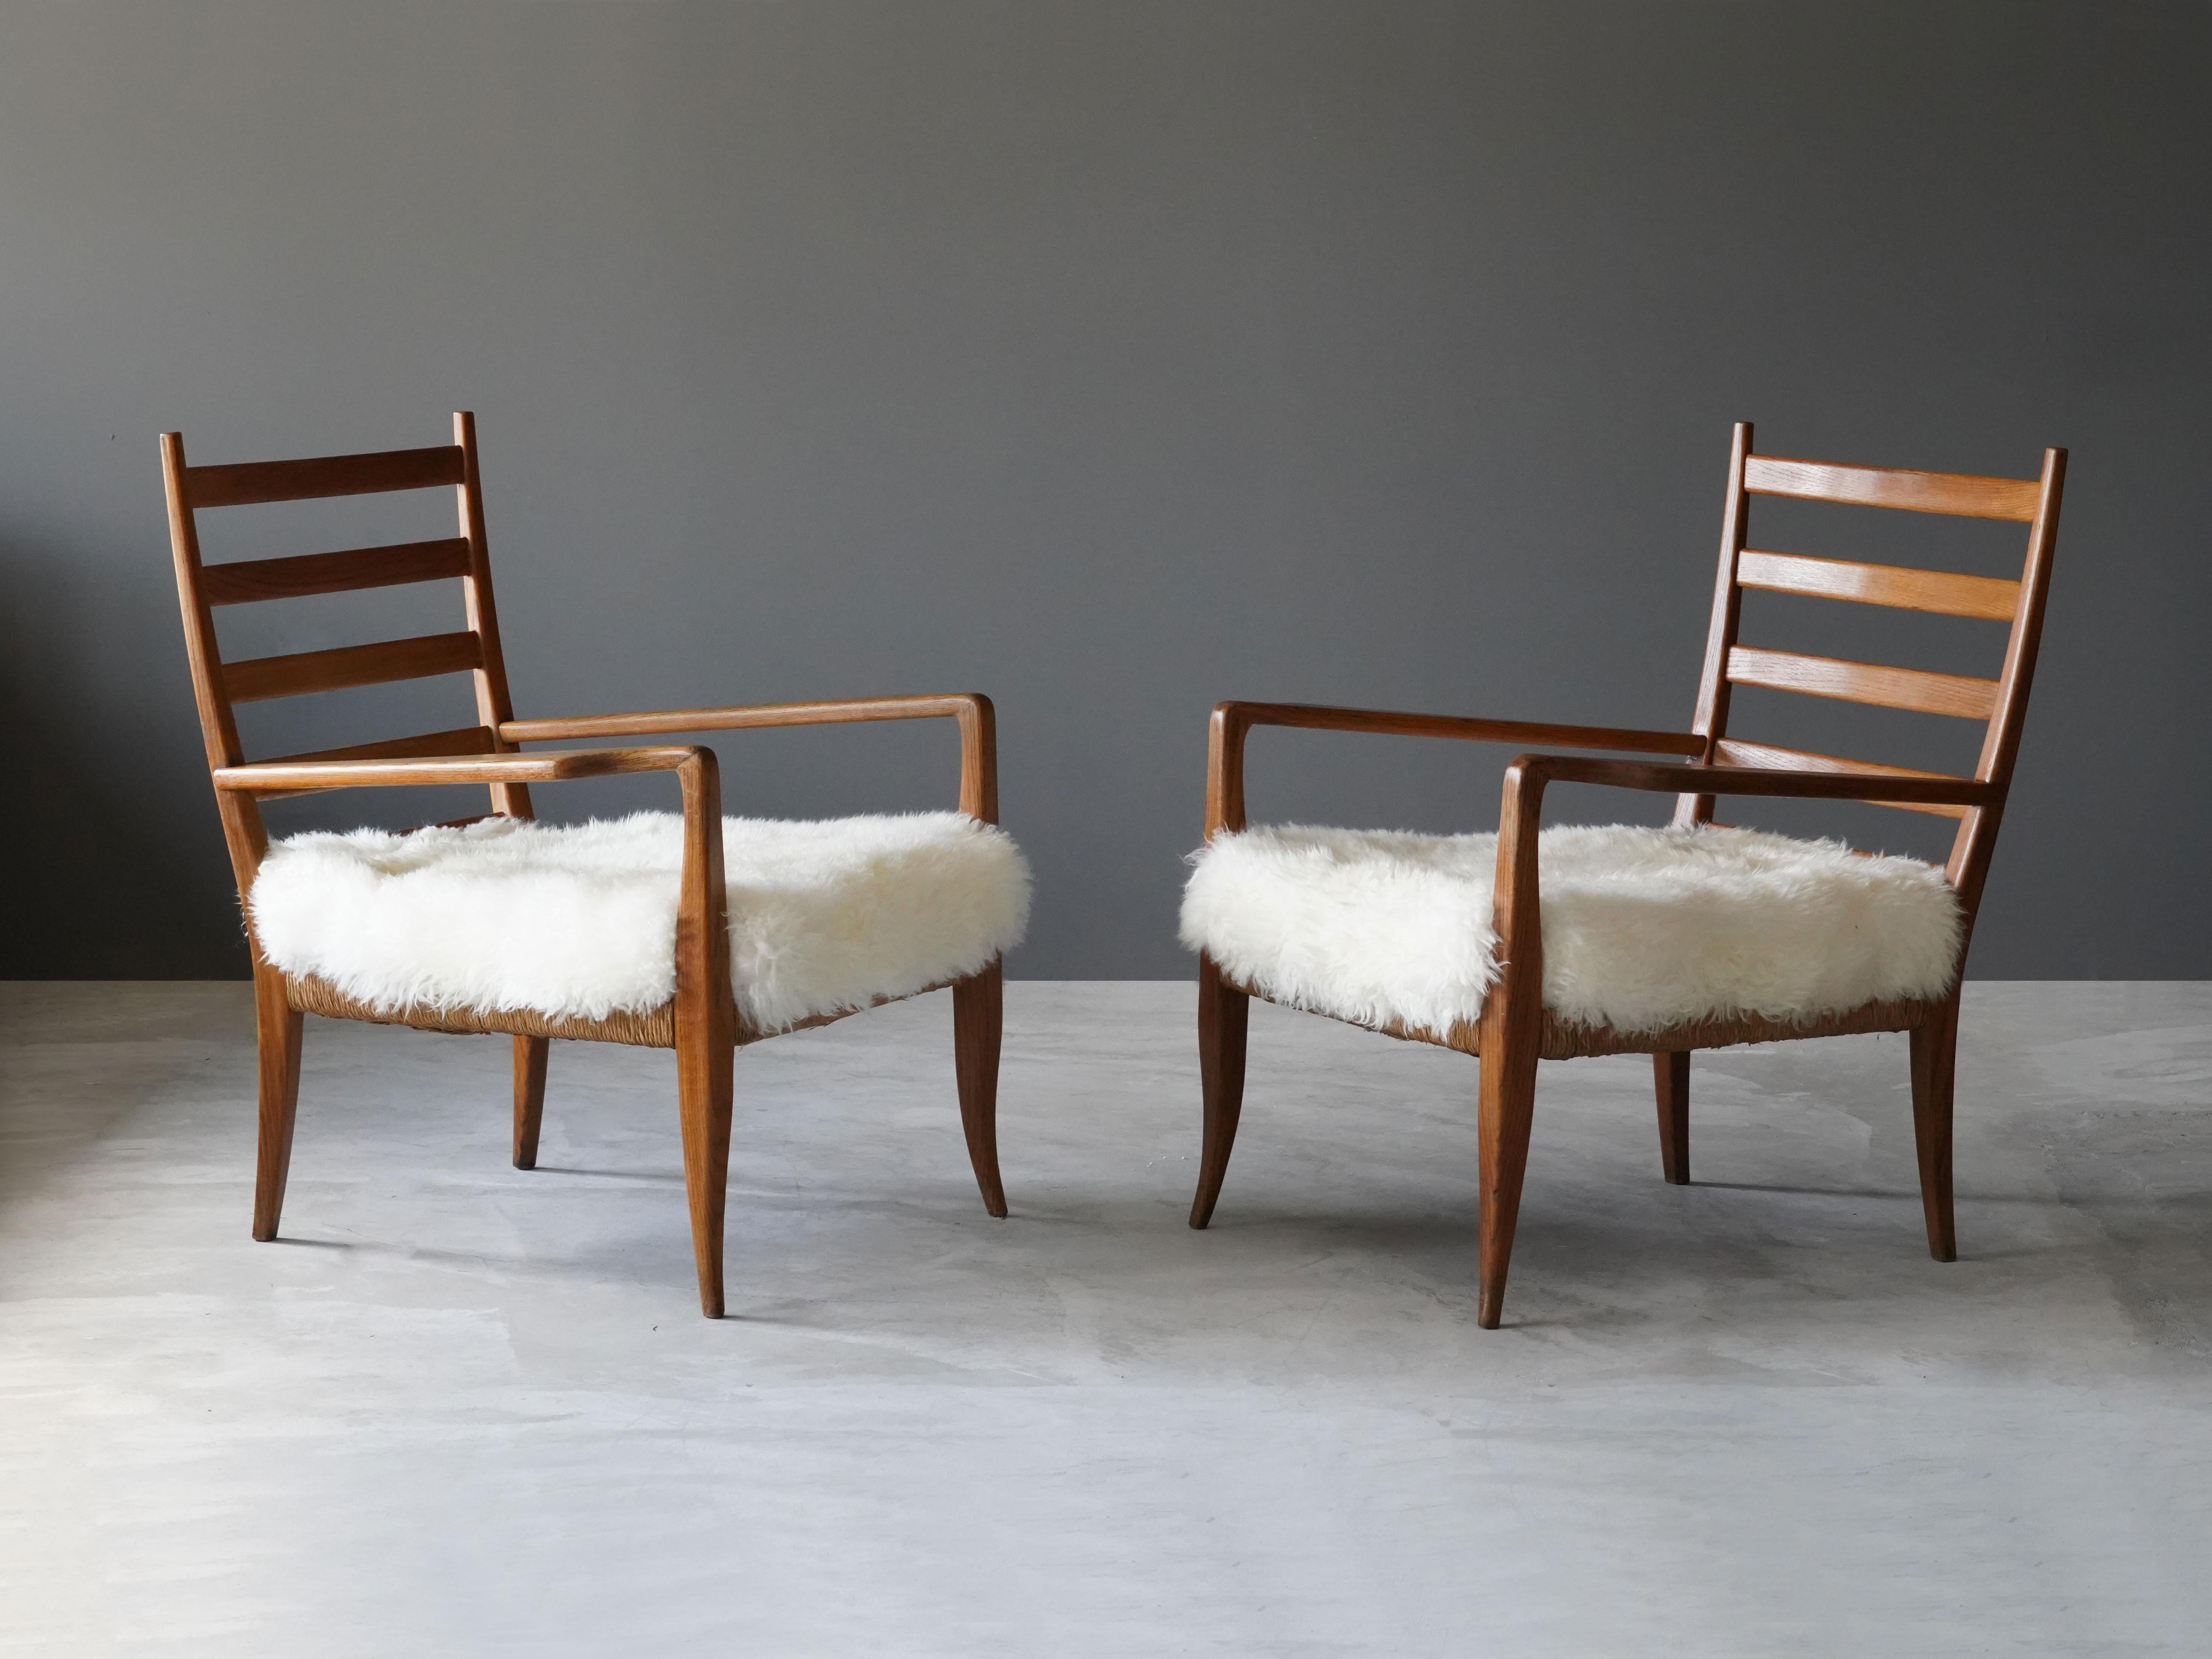 A pair of lounge chairs designed by Gio Ponti for La Rinascente, the high-end Milan department store. Produced in the 1930s. The ash frame has a rush seat, and placed atop a lambskin cushion. 

The pair is sold with a certificate from the Gio Ponti